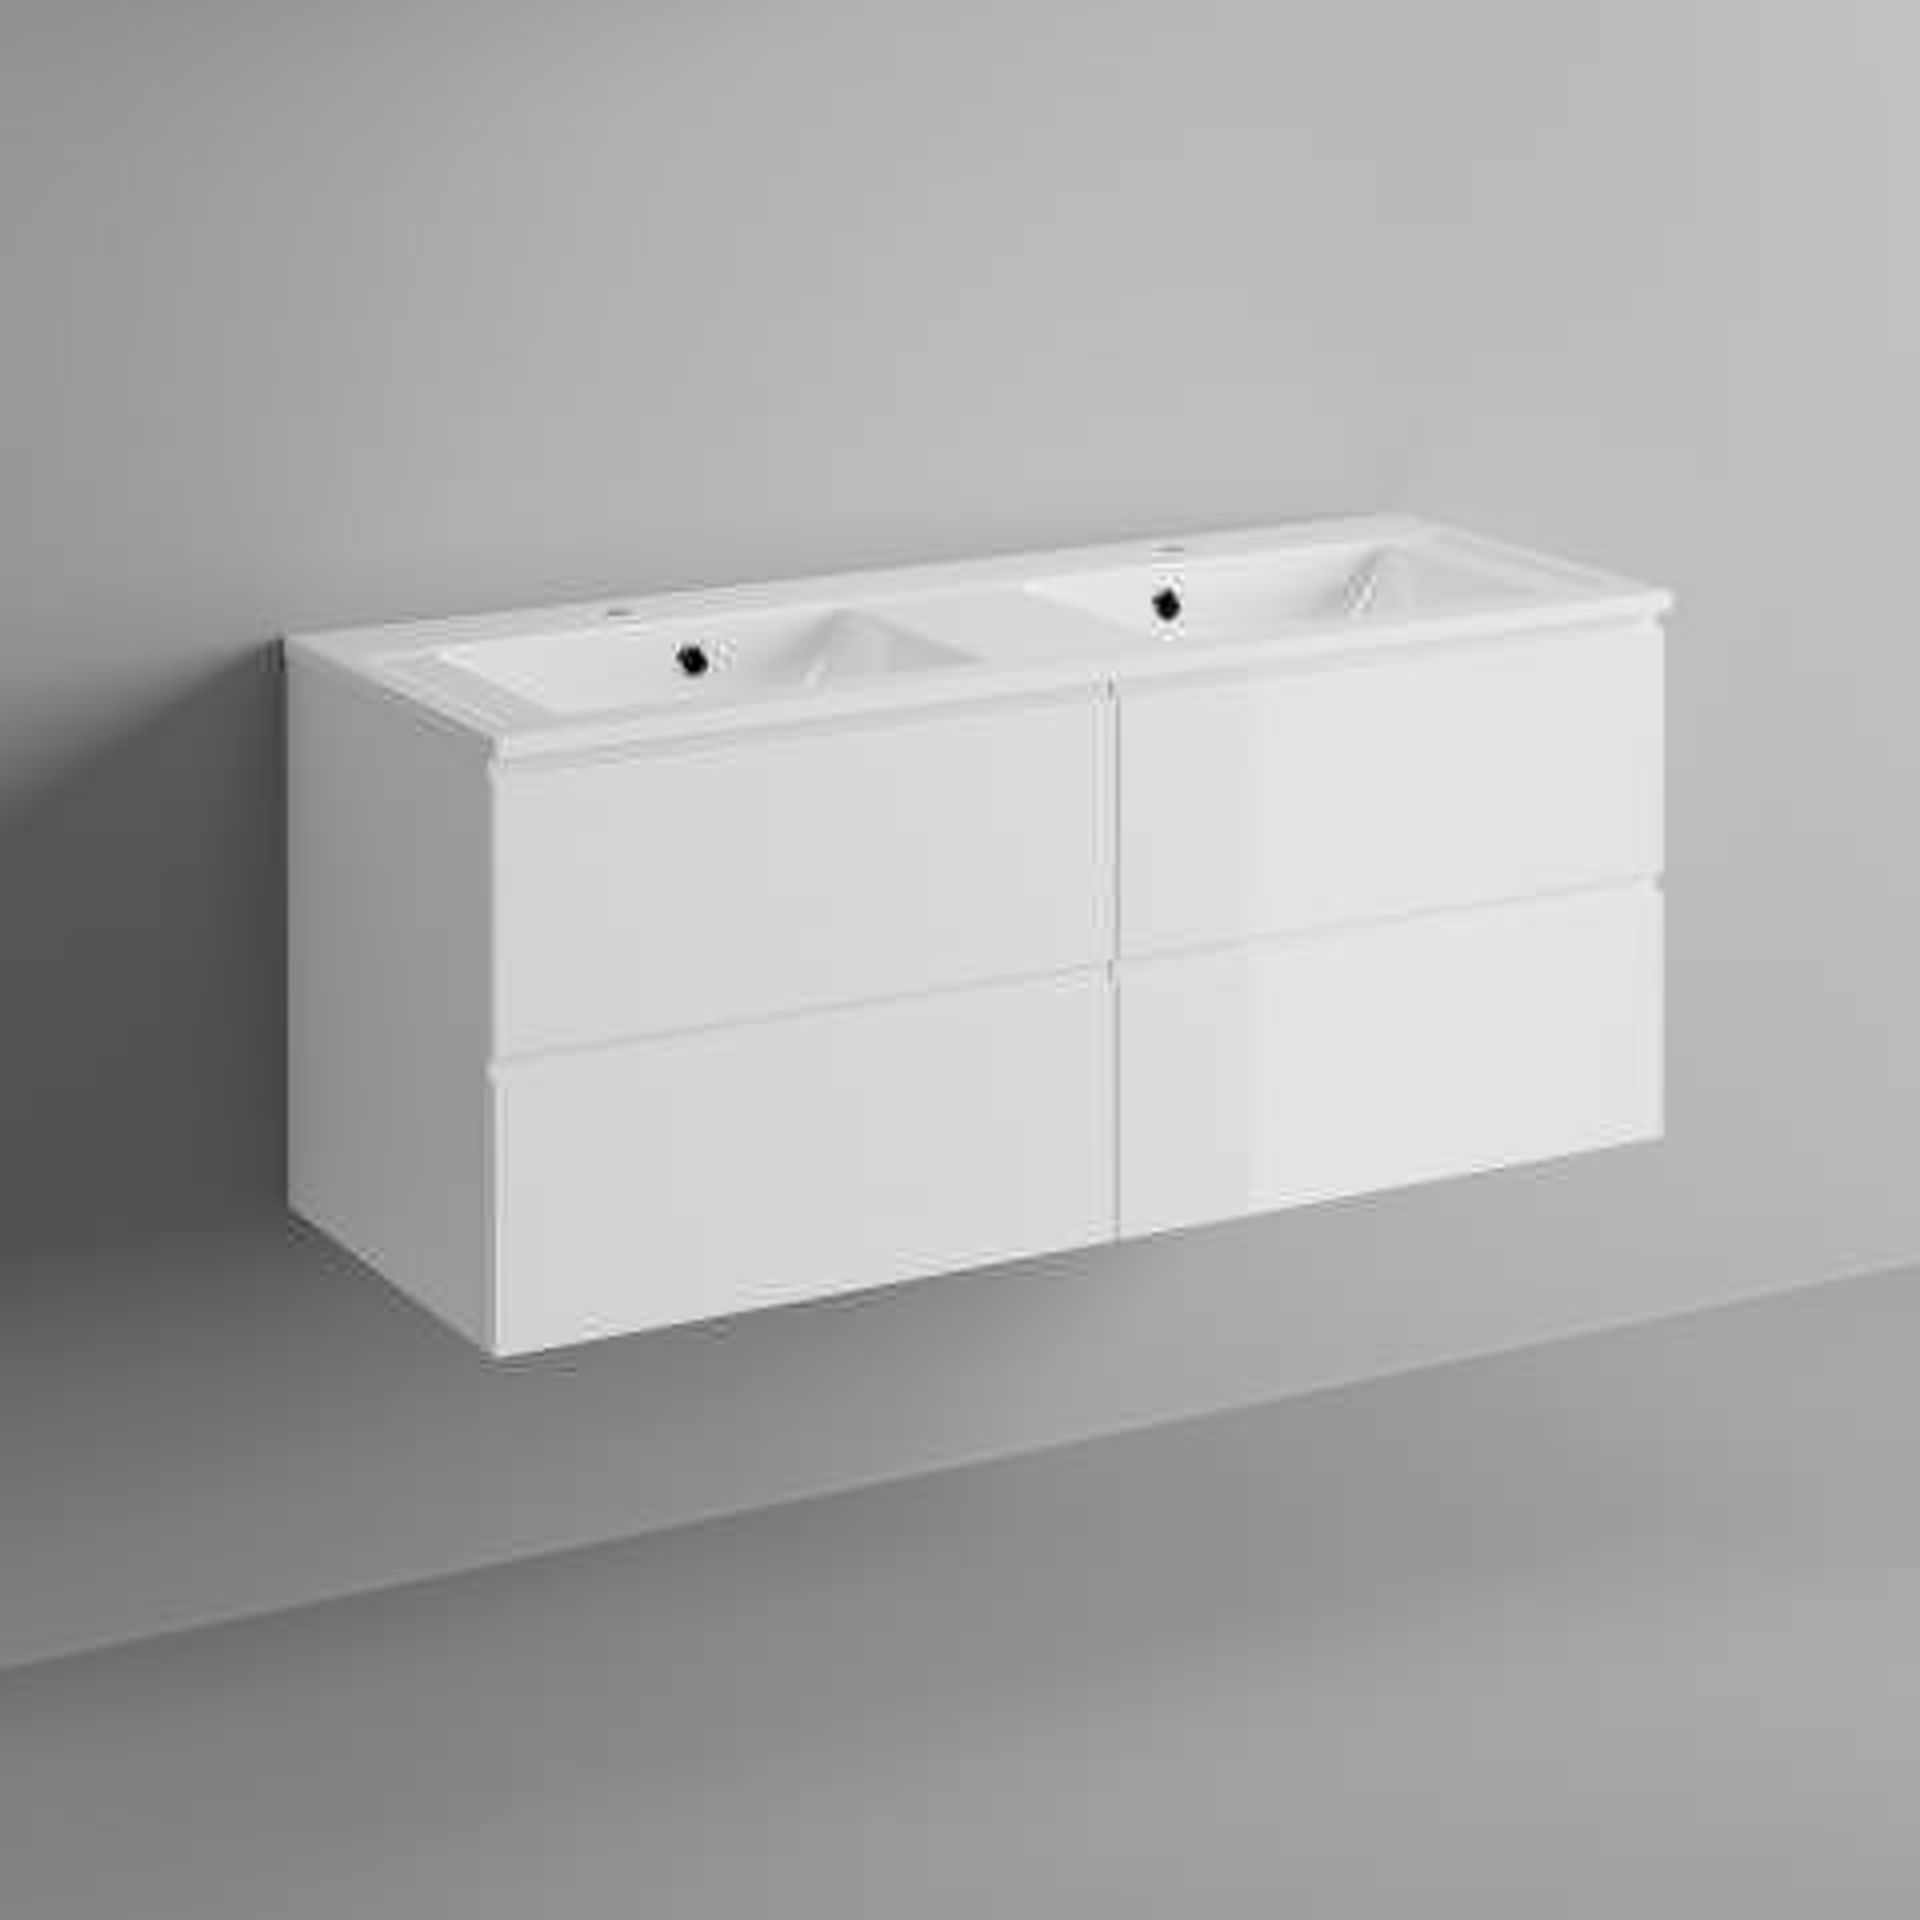 (I15) 1200mm Trevia High Gloss White Double Basin Cabinet - Wall Hung. RRP £999.99. Designer Look If - Image 4 of 5